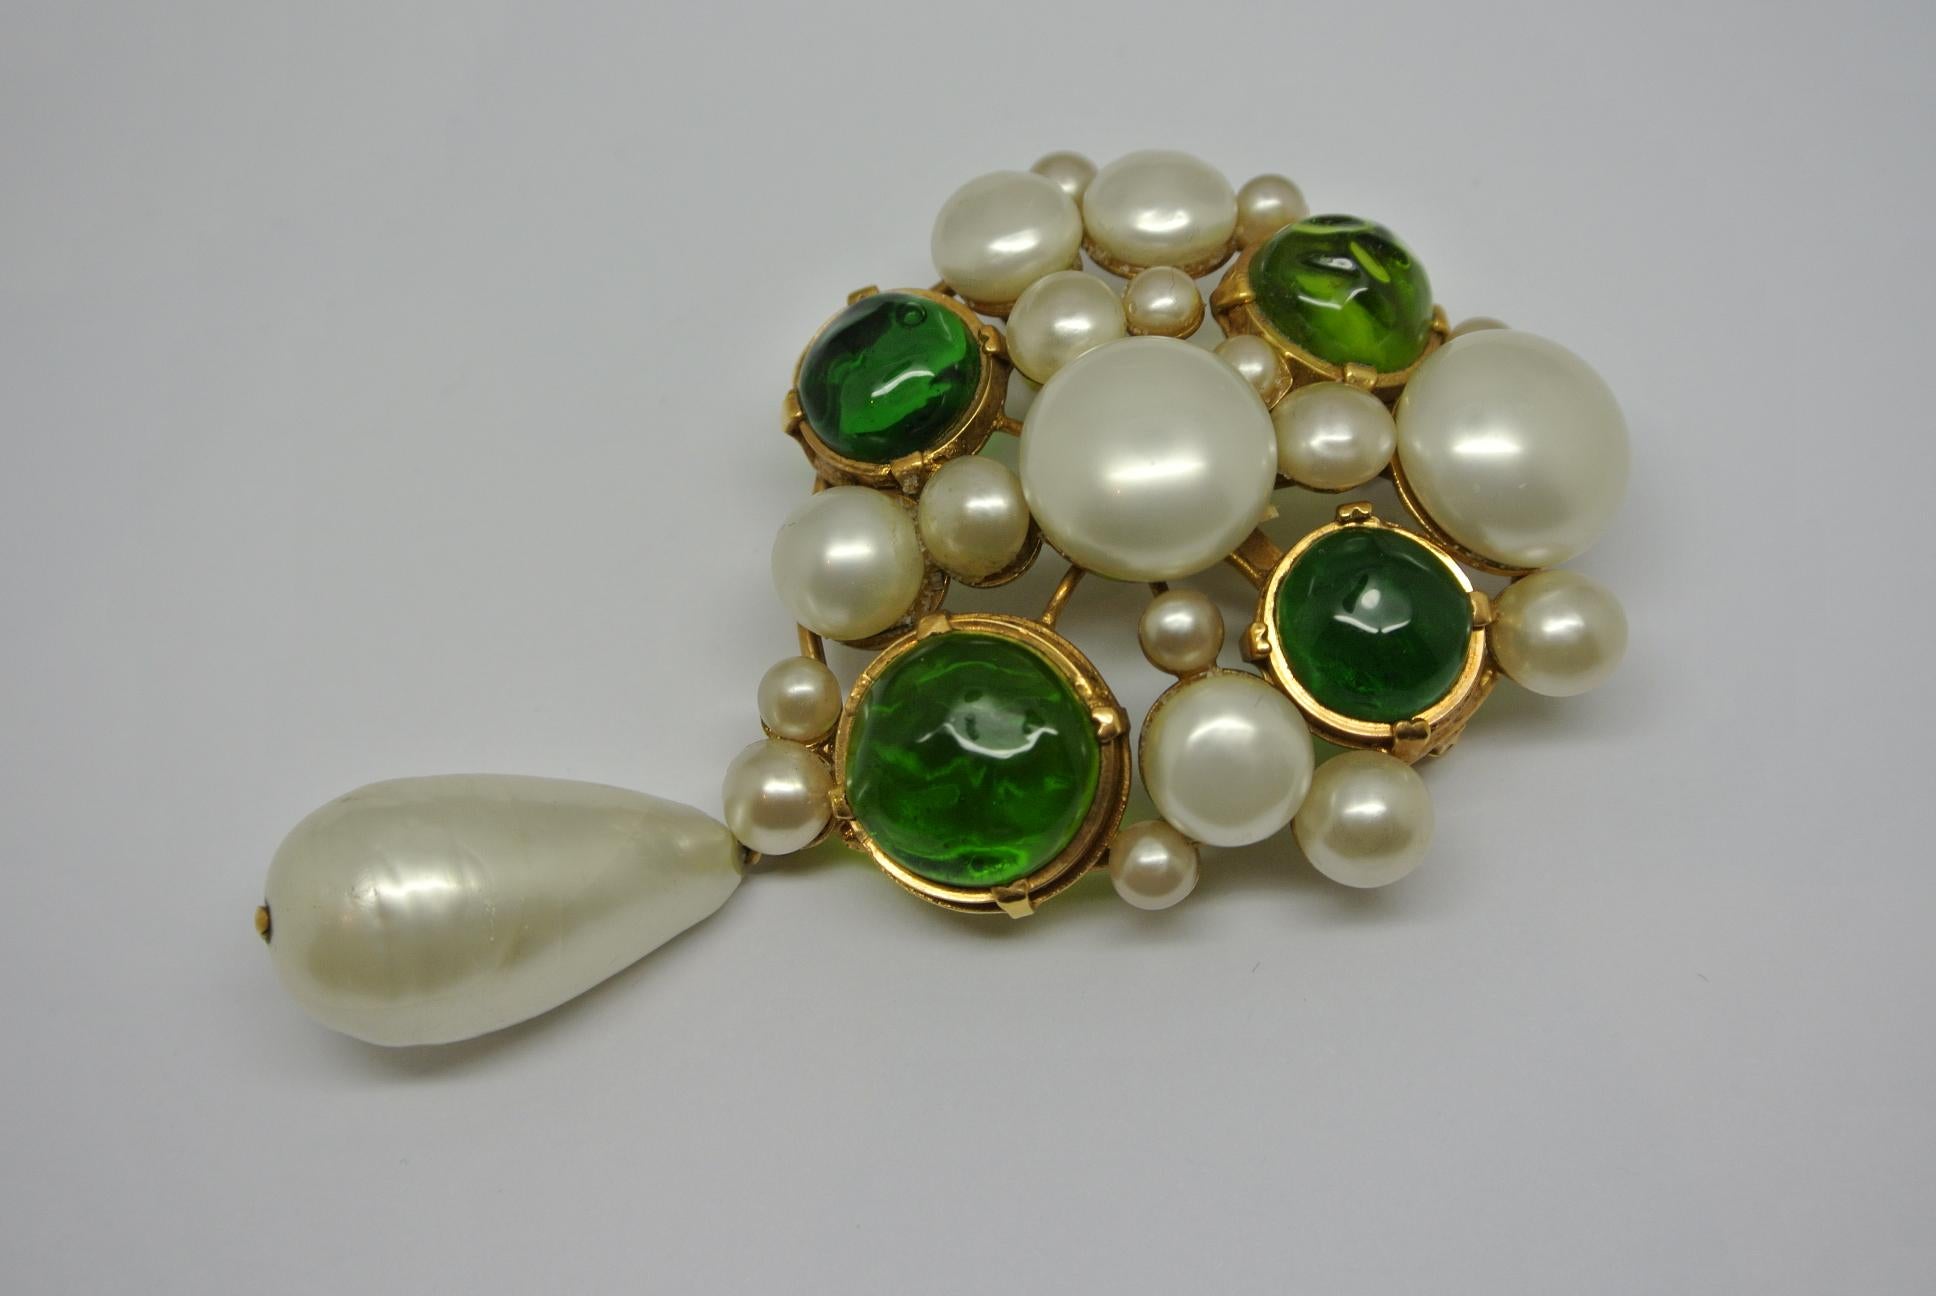 Artist Vintage Chanel Green Gripoix Poured Glass Faux Pearl Drop Brooch Pendant For Sale